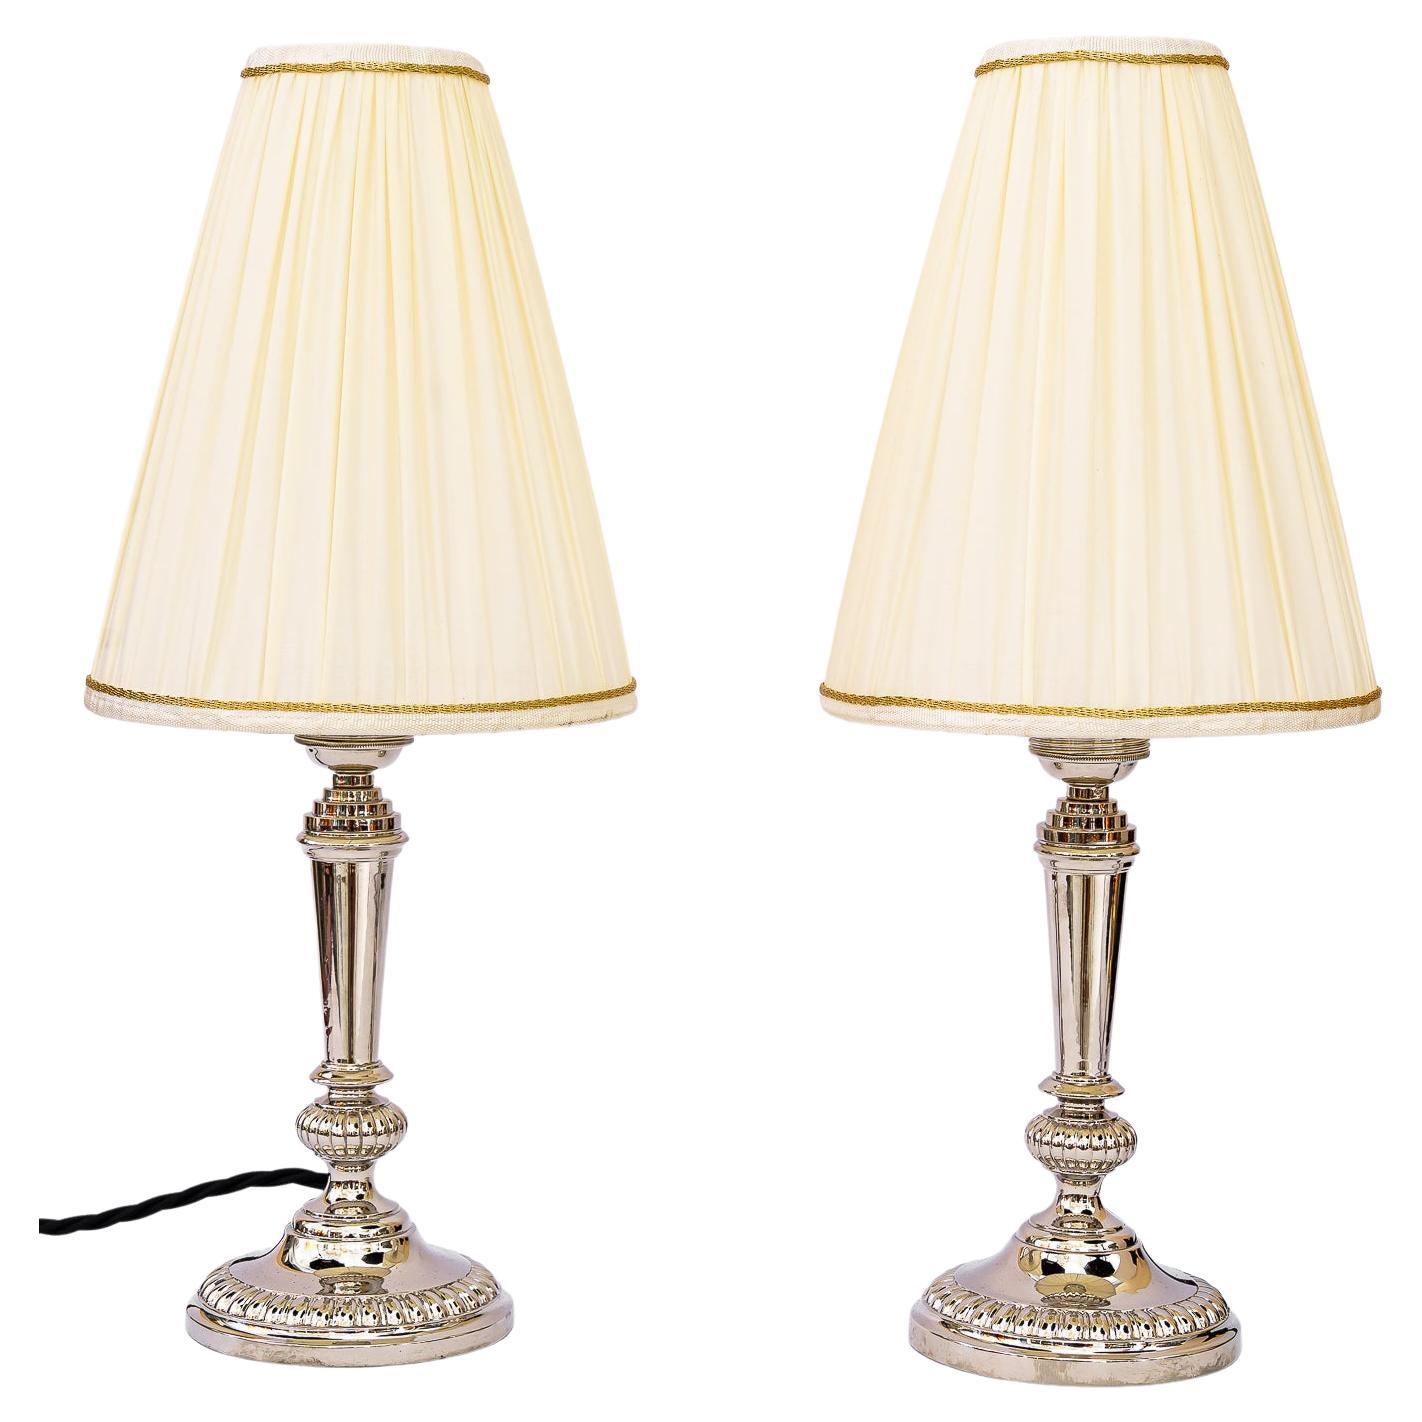 2 Art Deco Nickel, Plated Table Lamps with Fabric Shades, Vienna, Around 1920s For Sale